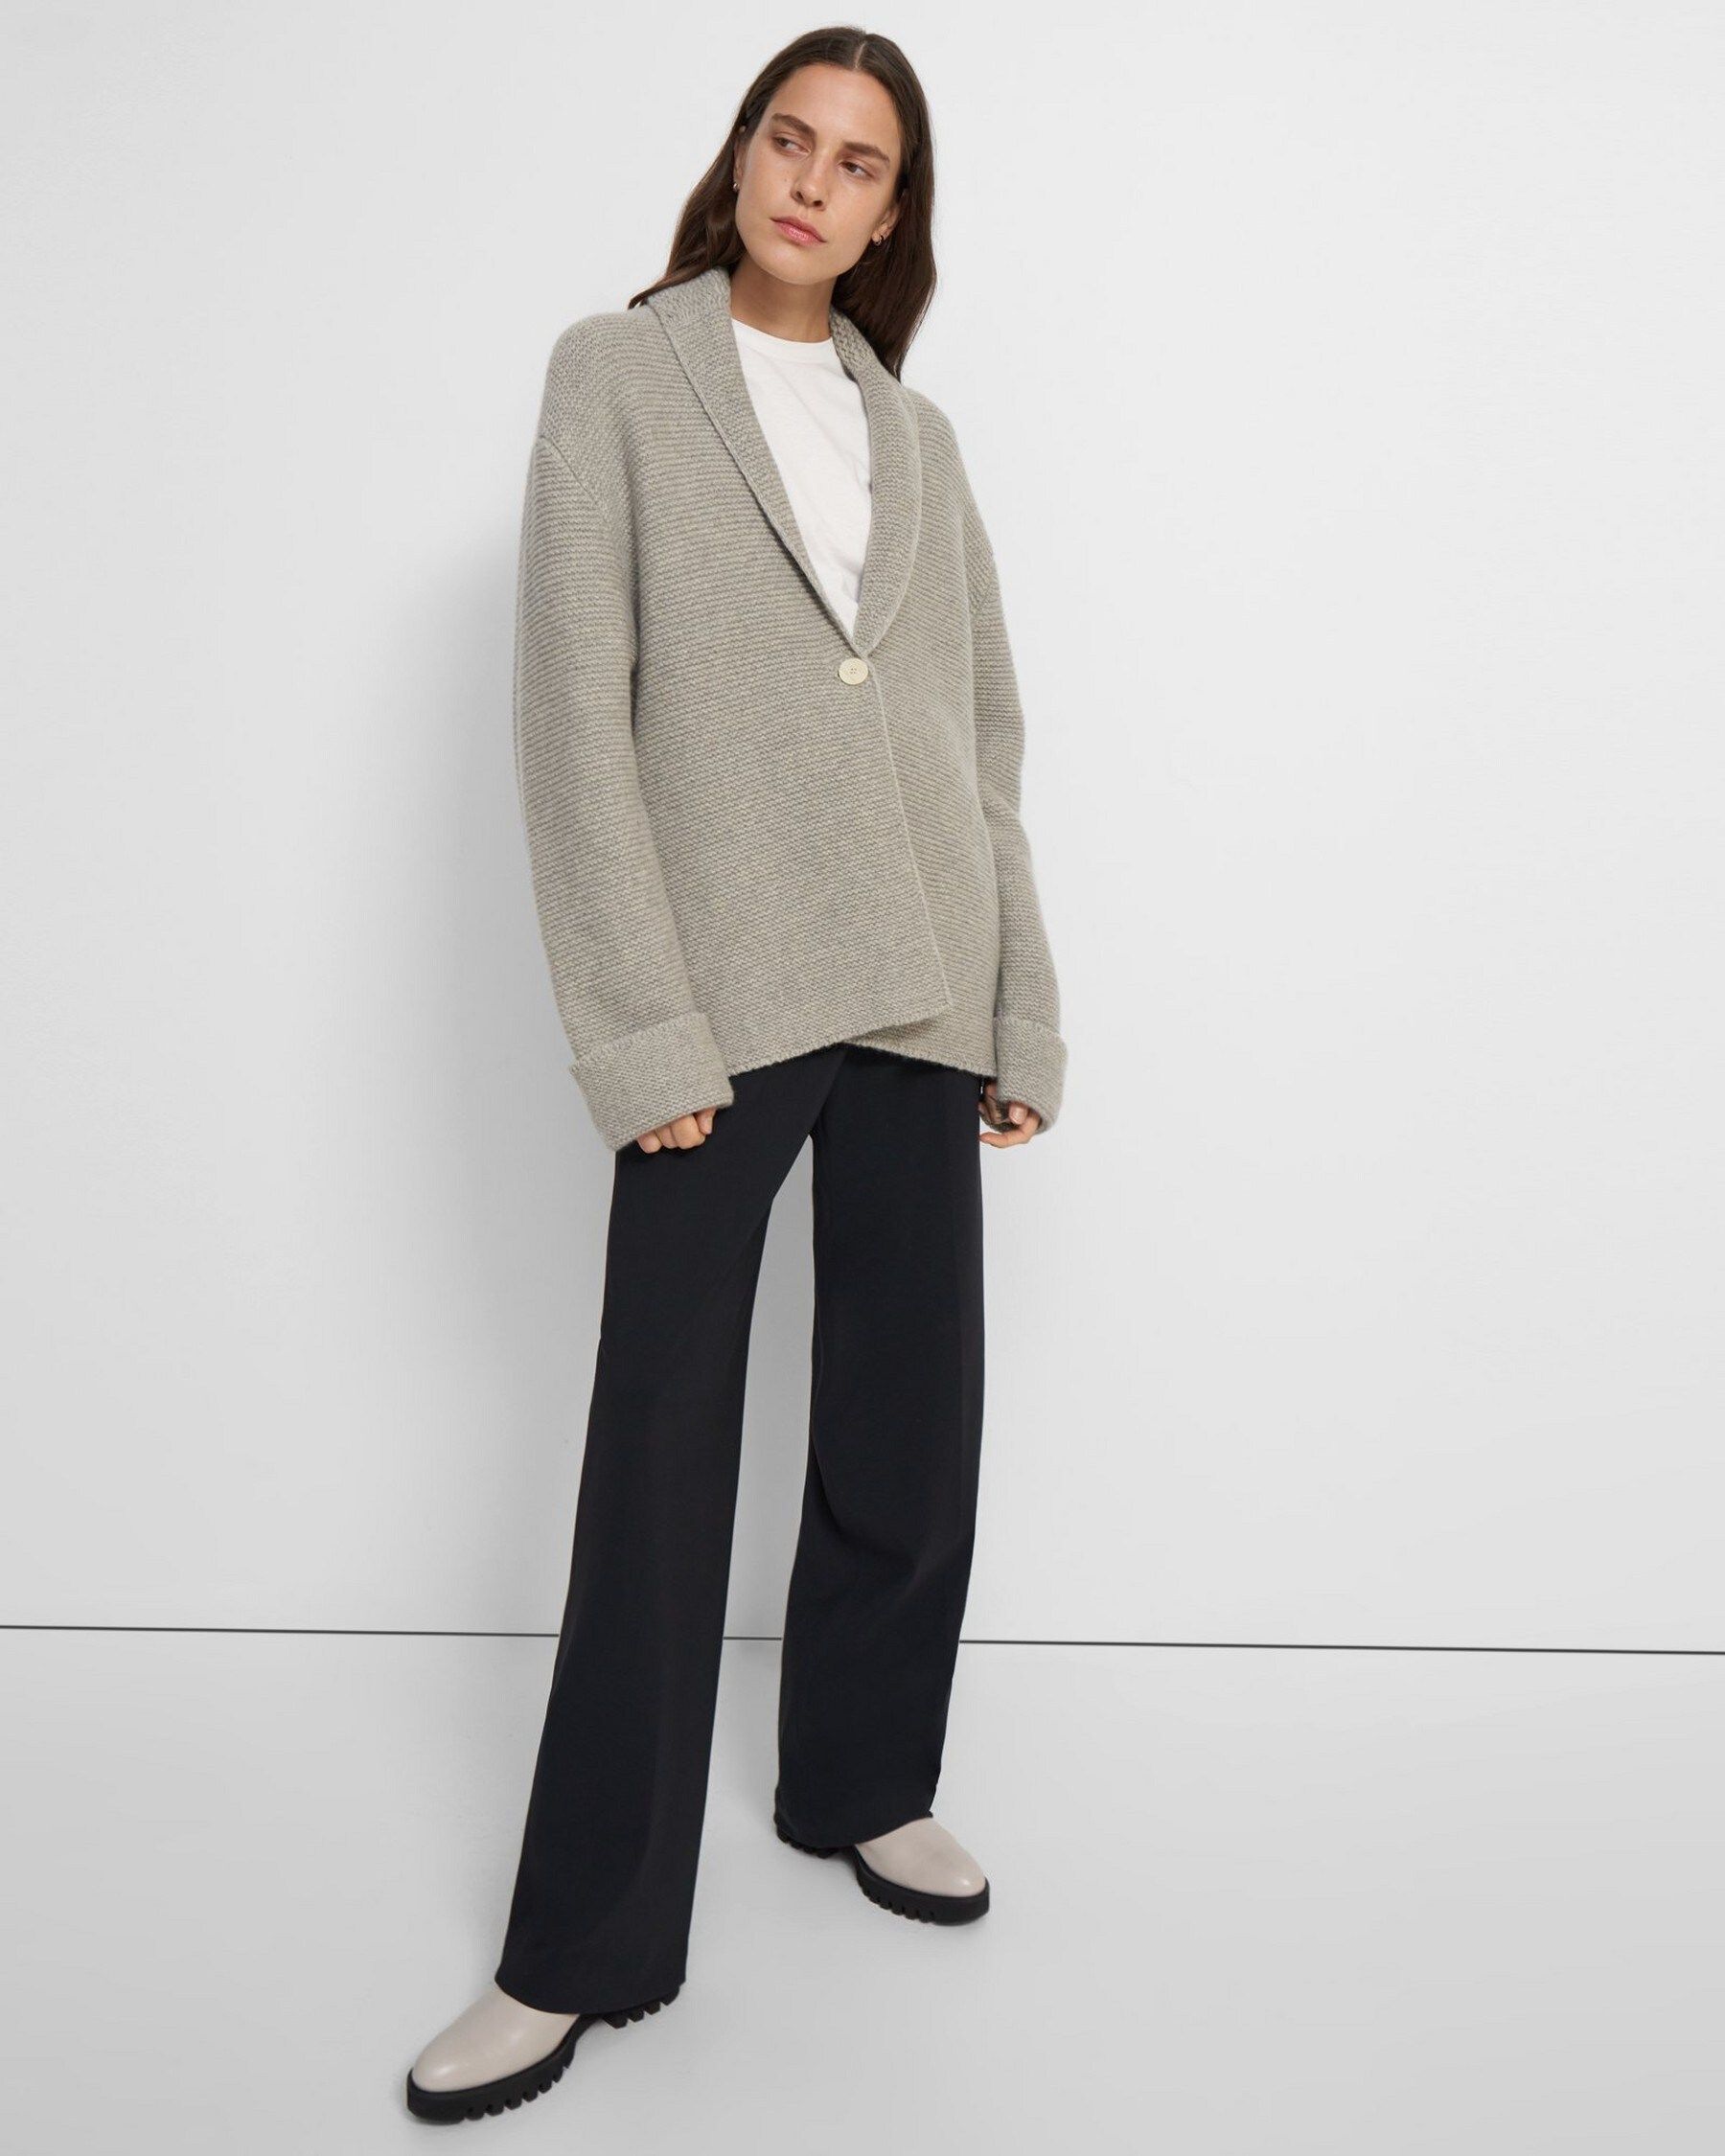 Sweater Coat in Wool-Cashmere | Theory